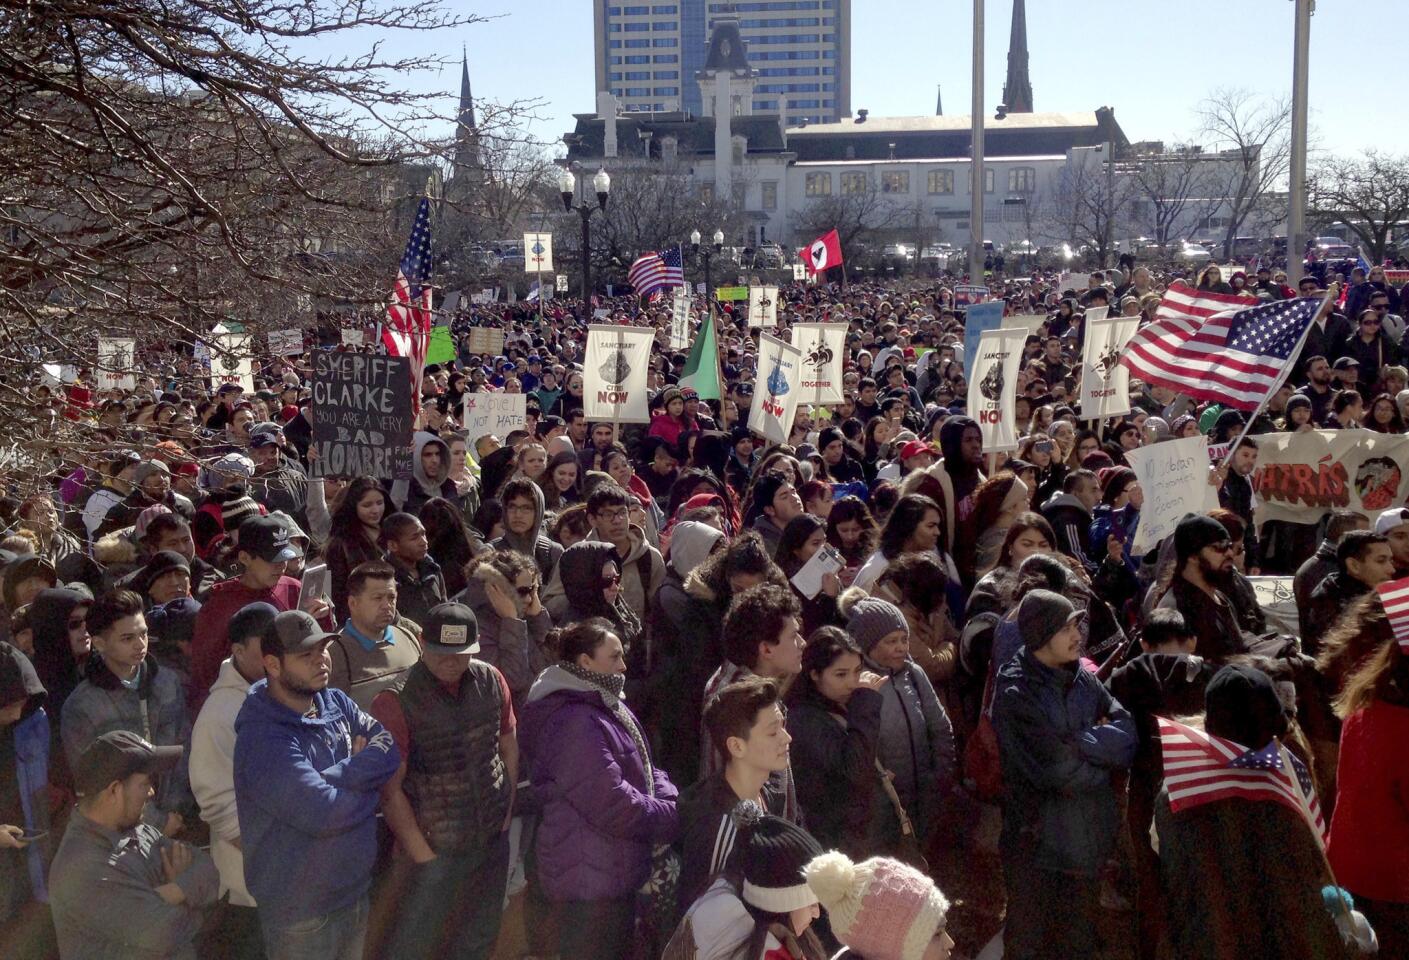 Thousands of Wisconsin activists gathered in Milwaukee's predominantly Hispanic South Side to protest the sheriff's plans to crack down on illegal immigration Feb. 13, 2017. The demonstrators, who have gathered from at least 12 cities across the state, say are opposed to Milwaukee County Sheriff David Clarke's plan to enroll his deputies in a federal program that allows them to act as immigration agents. (AP Photo by Gretchen Ehlke)